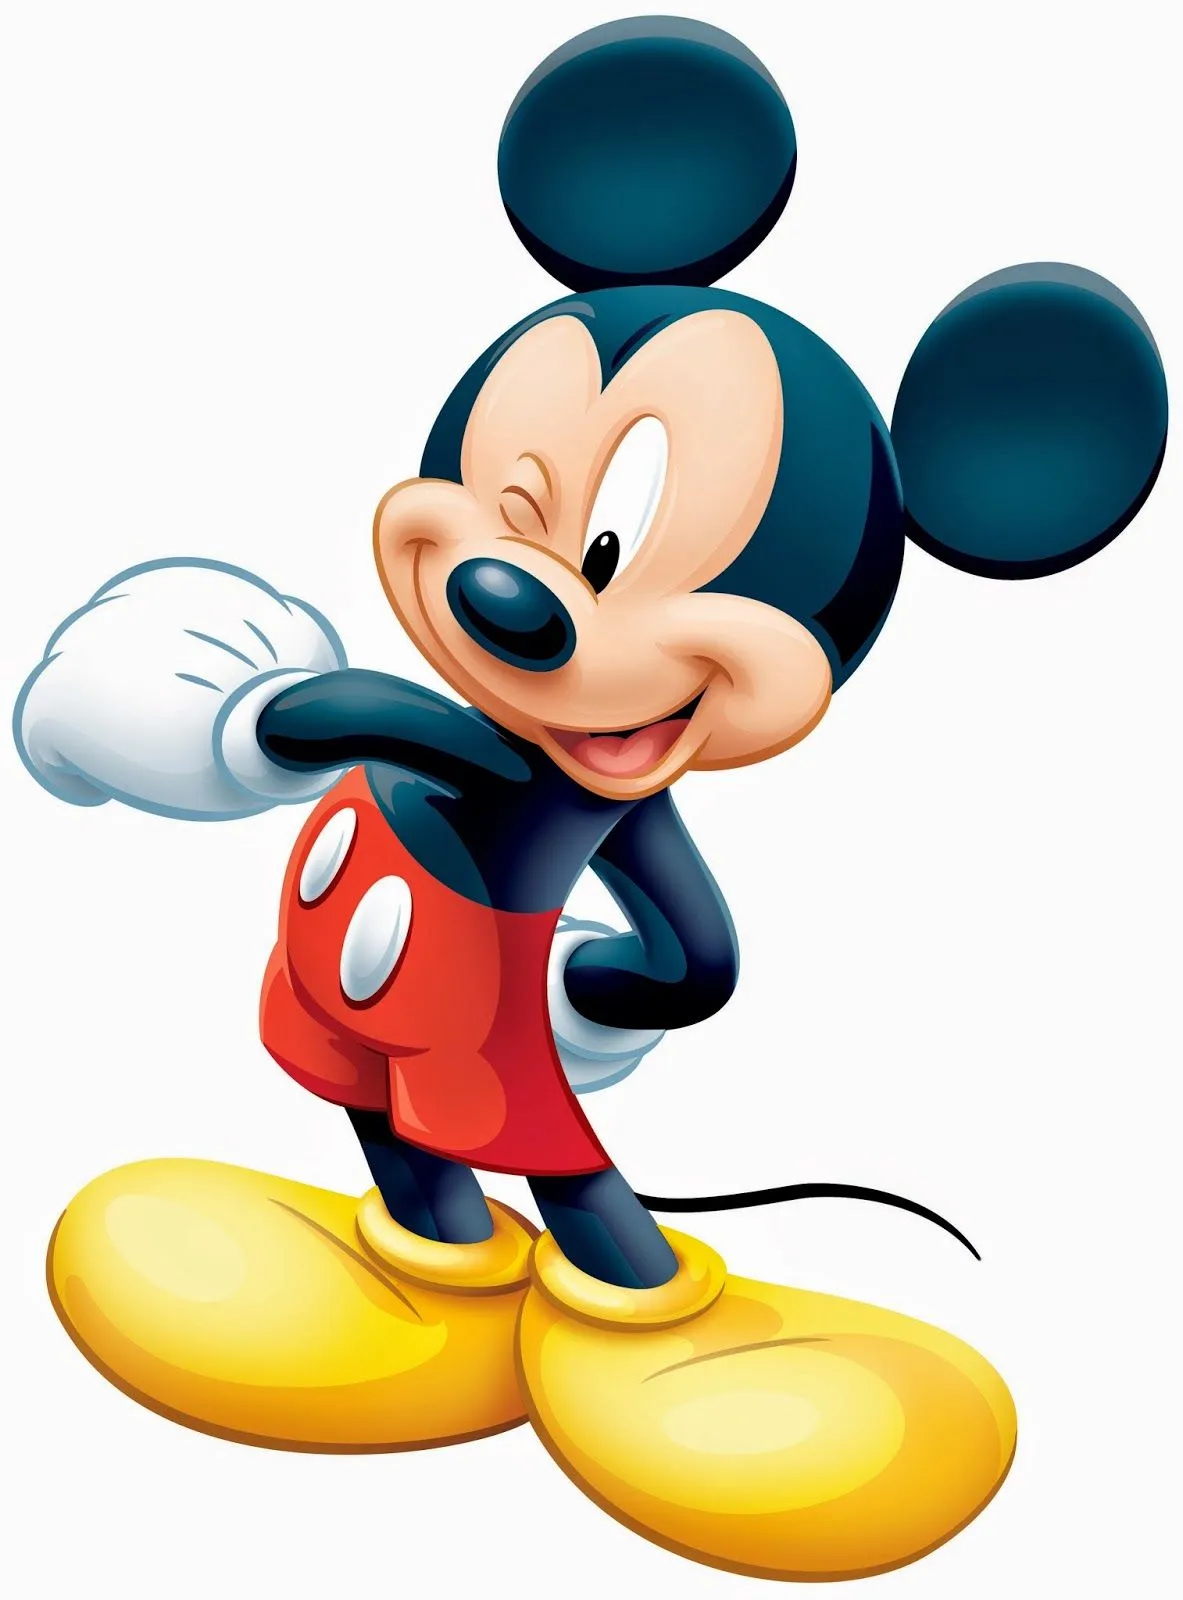 ImagesList.com: Mickey Mouse Images, part 1